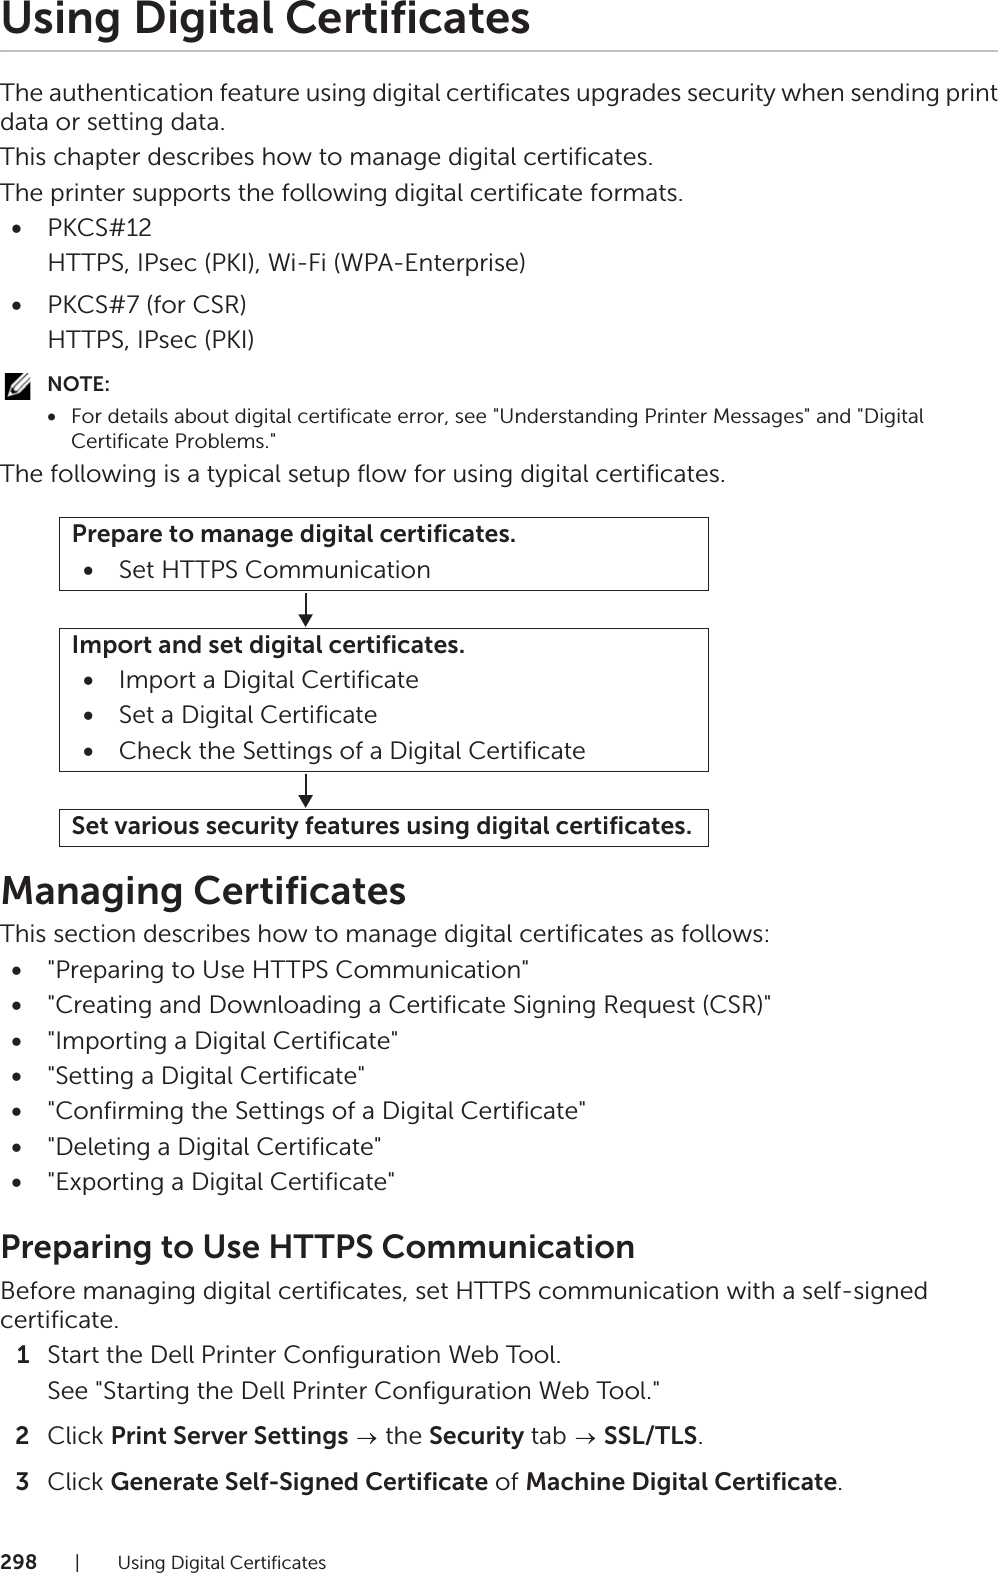 298| Using Digital CertificatesUsing Digital CertificatesThe authentication feature using digital certificates upgrades security when sending print data or setting data.This chapter describes how to manage digital certificates.The printer supports the following digital certificate formats.•PKCS#12HTTPS, IPsec (PKI), Wi-Fi (WPA-Enterprise)•PKCS#7 (for CSR)HTTPS, IPsec (PKI)NOTE:•For details about digital certificate error, see &quot;Understanding Printer Messages&quot; and &quot;Digital Certificate Problems.&quot;The following is a typical setup flow for using digital certificates.Managing CertificatesThis section describes how to manage digital certificates as follows:•&quot;Preparing to Use HTTPS Communication&quot;•&quot;Creating and Downloading a Certificate Signing Request (CSR)&quot;•&quot;Importing a Digital Certificate&quot;•&quot;Setting a Digital Certificate&quot;•&quot;Confirming the Settings of a Digital Certificate&quot;•&quot;Deleting a Digital Certificate&quot;•&quot;Exporting a Digital Certificate&quot;Preparing to Use HTTPS CommunicationBefore managing digital certificates, set HTTPS communication with a self-signed certificate.1Start the Dell Printer Configuration Web Tool.See &quot;Starting the Dell Printer Configuration Web Tool.&quot;2Click Print Server Settings  the Security tab   SSL/TLS.3Click Generate Self-Signed Certificate of Machine Digital Certificate.Prepare to manage digital certificates.•Set HTTPS CommunicationImport and set digital certificates.•Import a Digital Certificate•Set a Digital Certificate•Check the Settings of a Digital CertificateSet various security features using digital certificates.